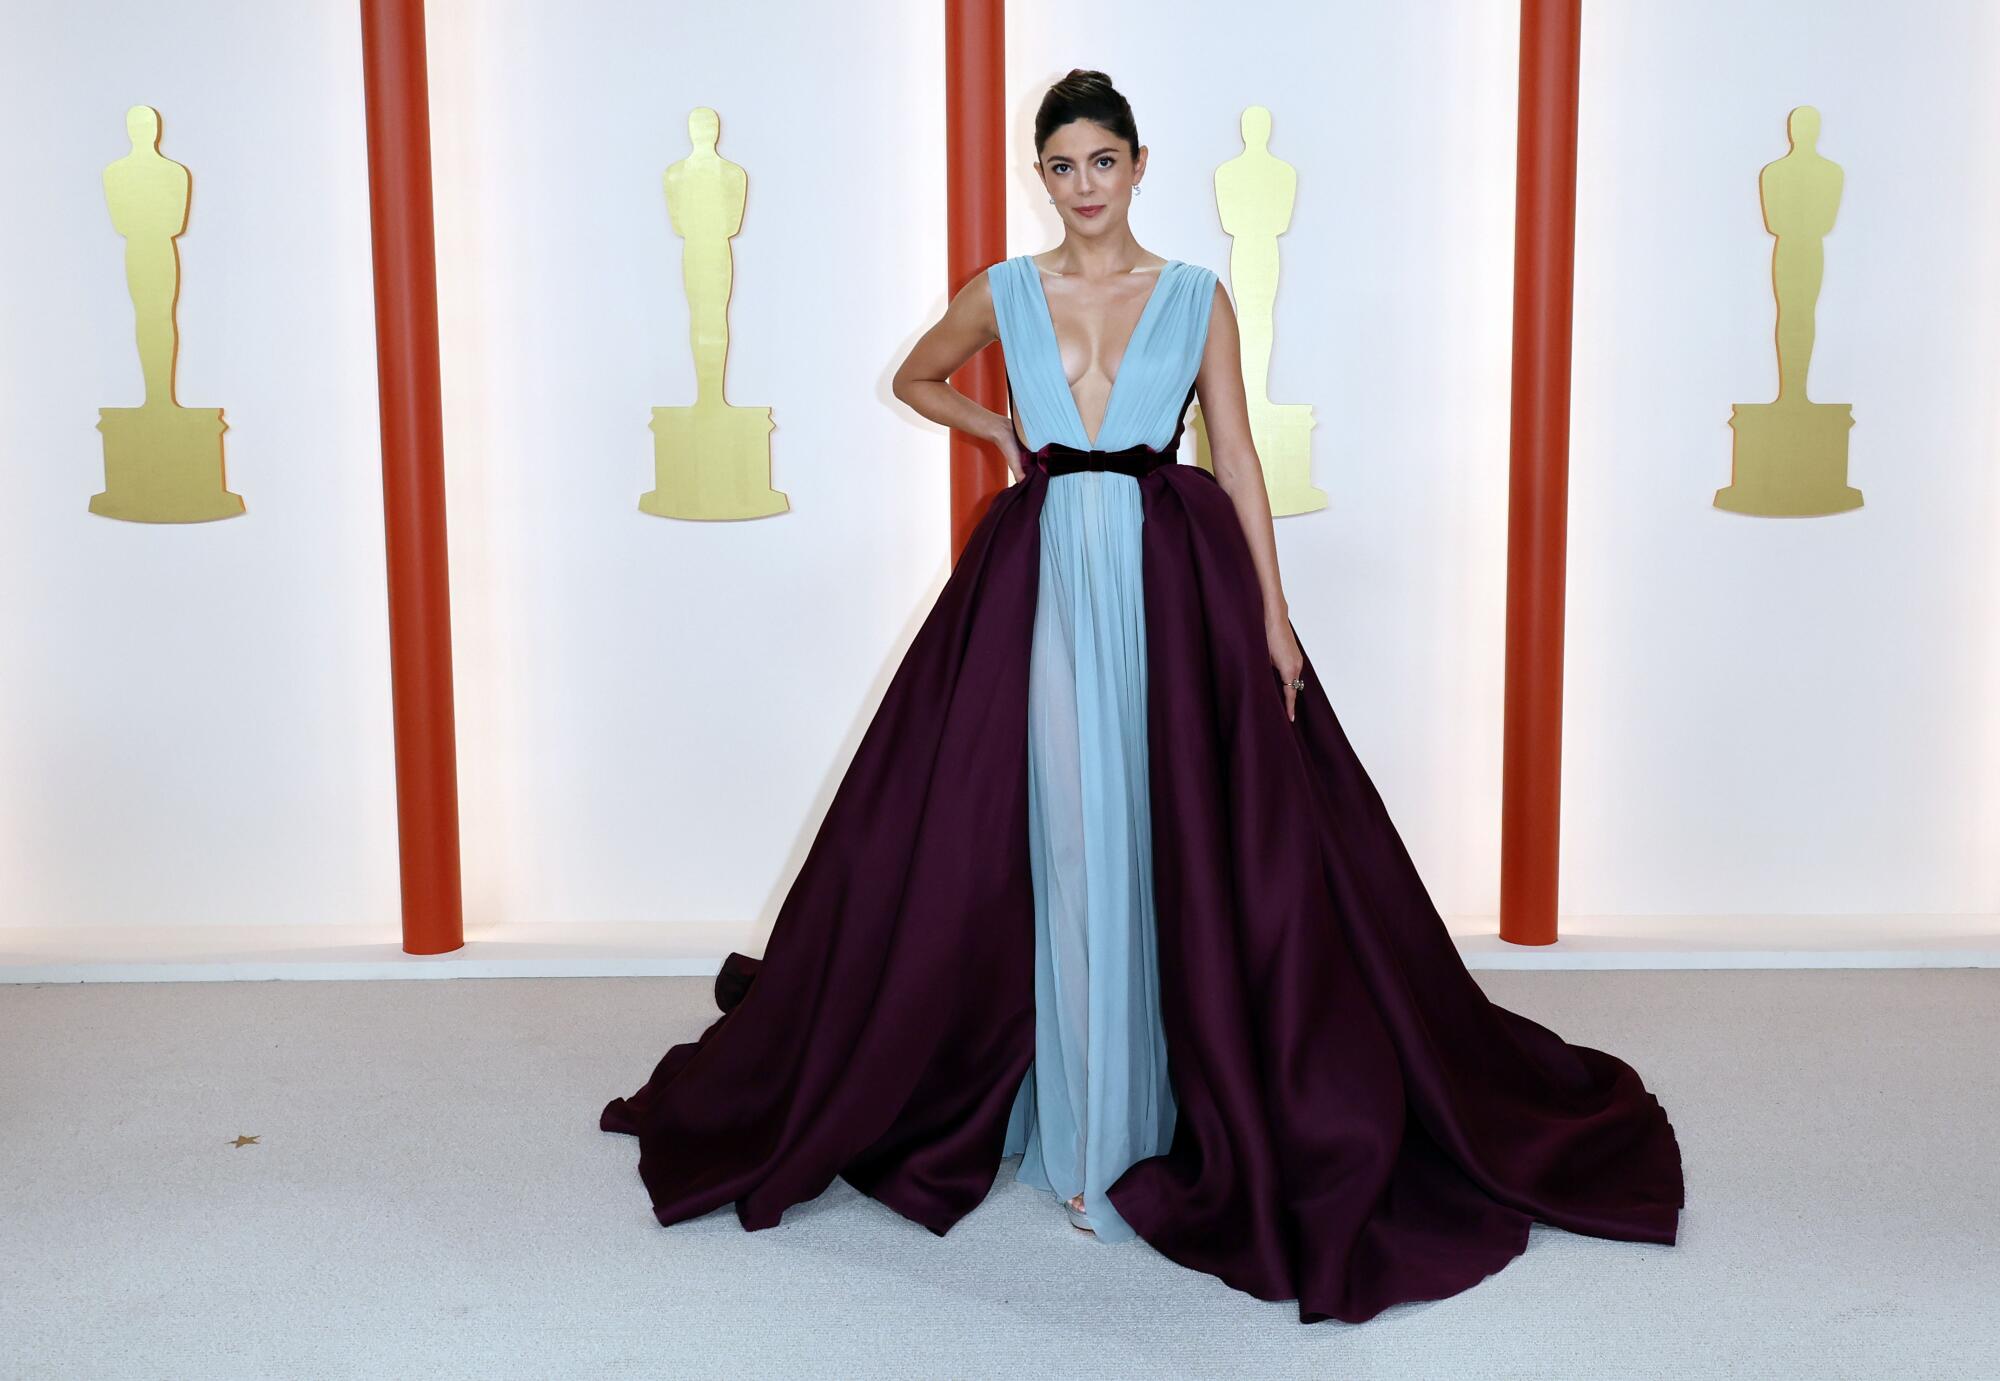 This year's Oscar fashion was elegant and refined